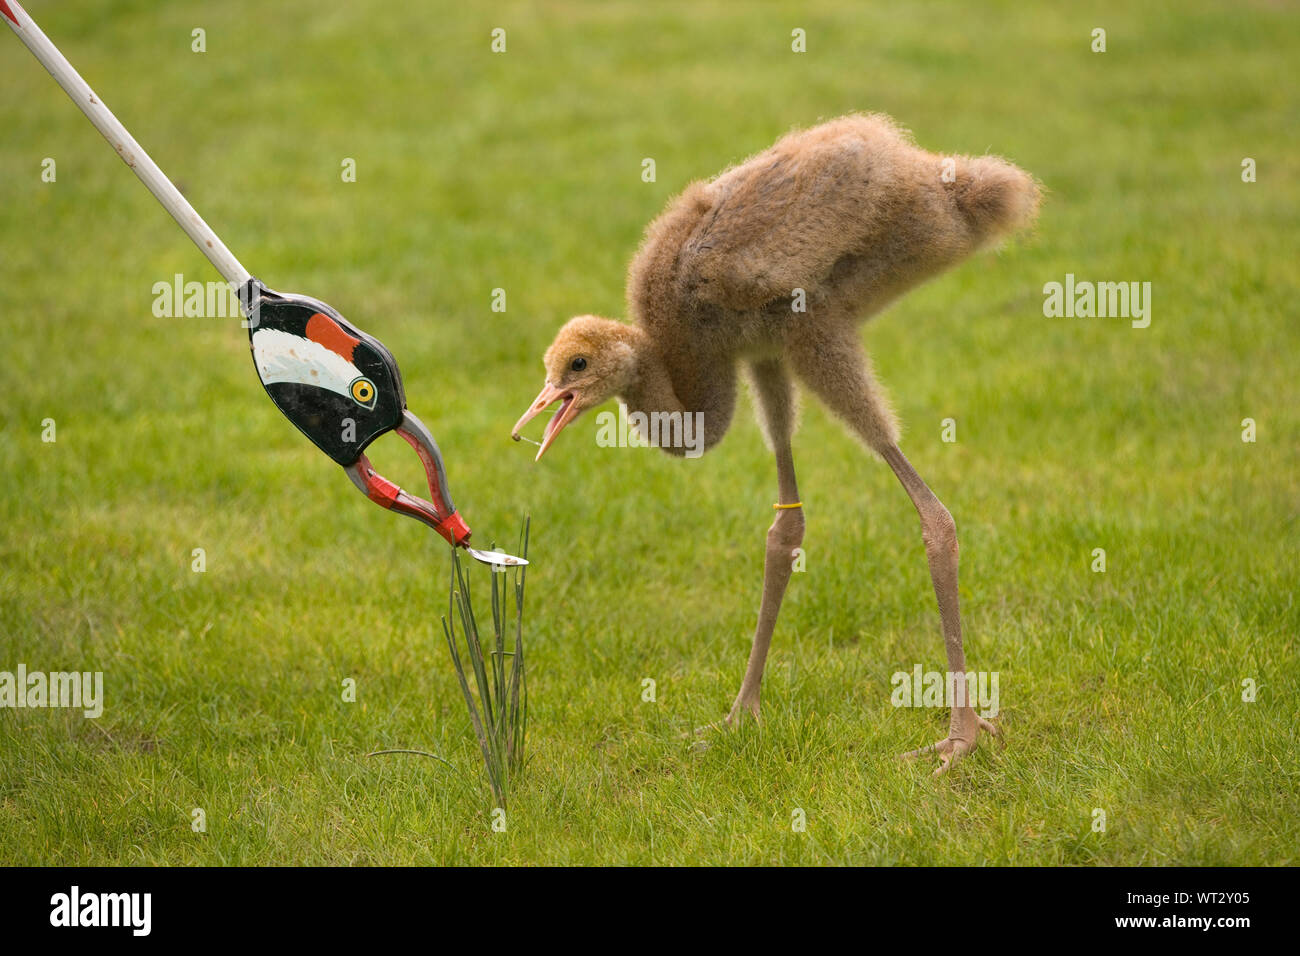 COMMON CRANE Grus grus chick having learnt to feed from a spoon attached to the moulded resin head of an adult, on the end of a long-handled litter gathering stick. A means of avoidance imprinting on a human carer. Stock Photo